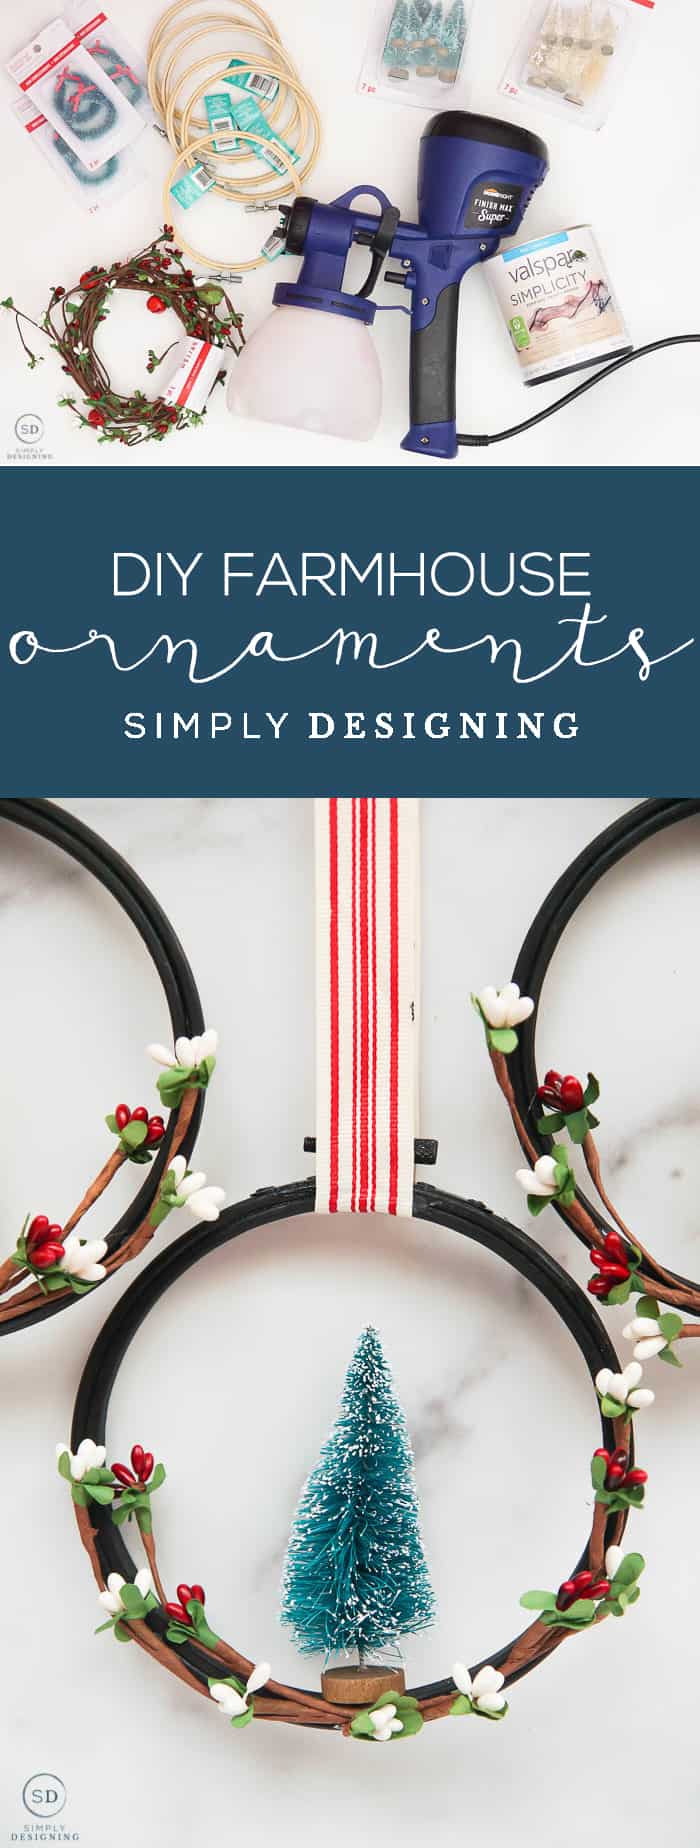 If you are looking for an easy and inexpensive way to decorate your tree this year check out this post about how to make farmhouse Christmas ornaments